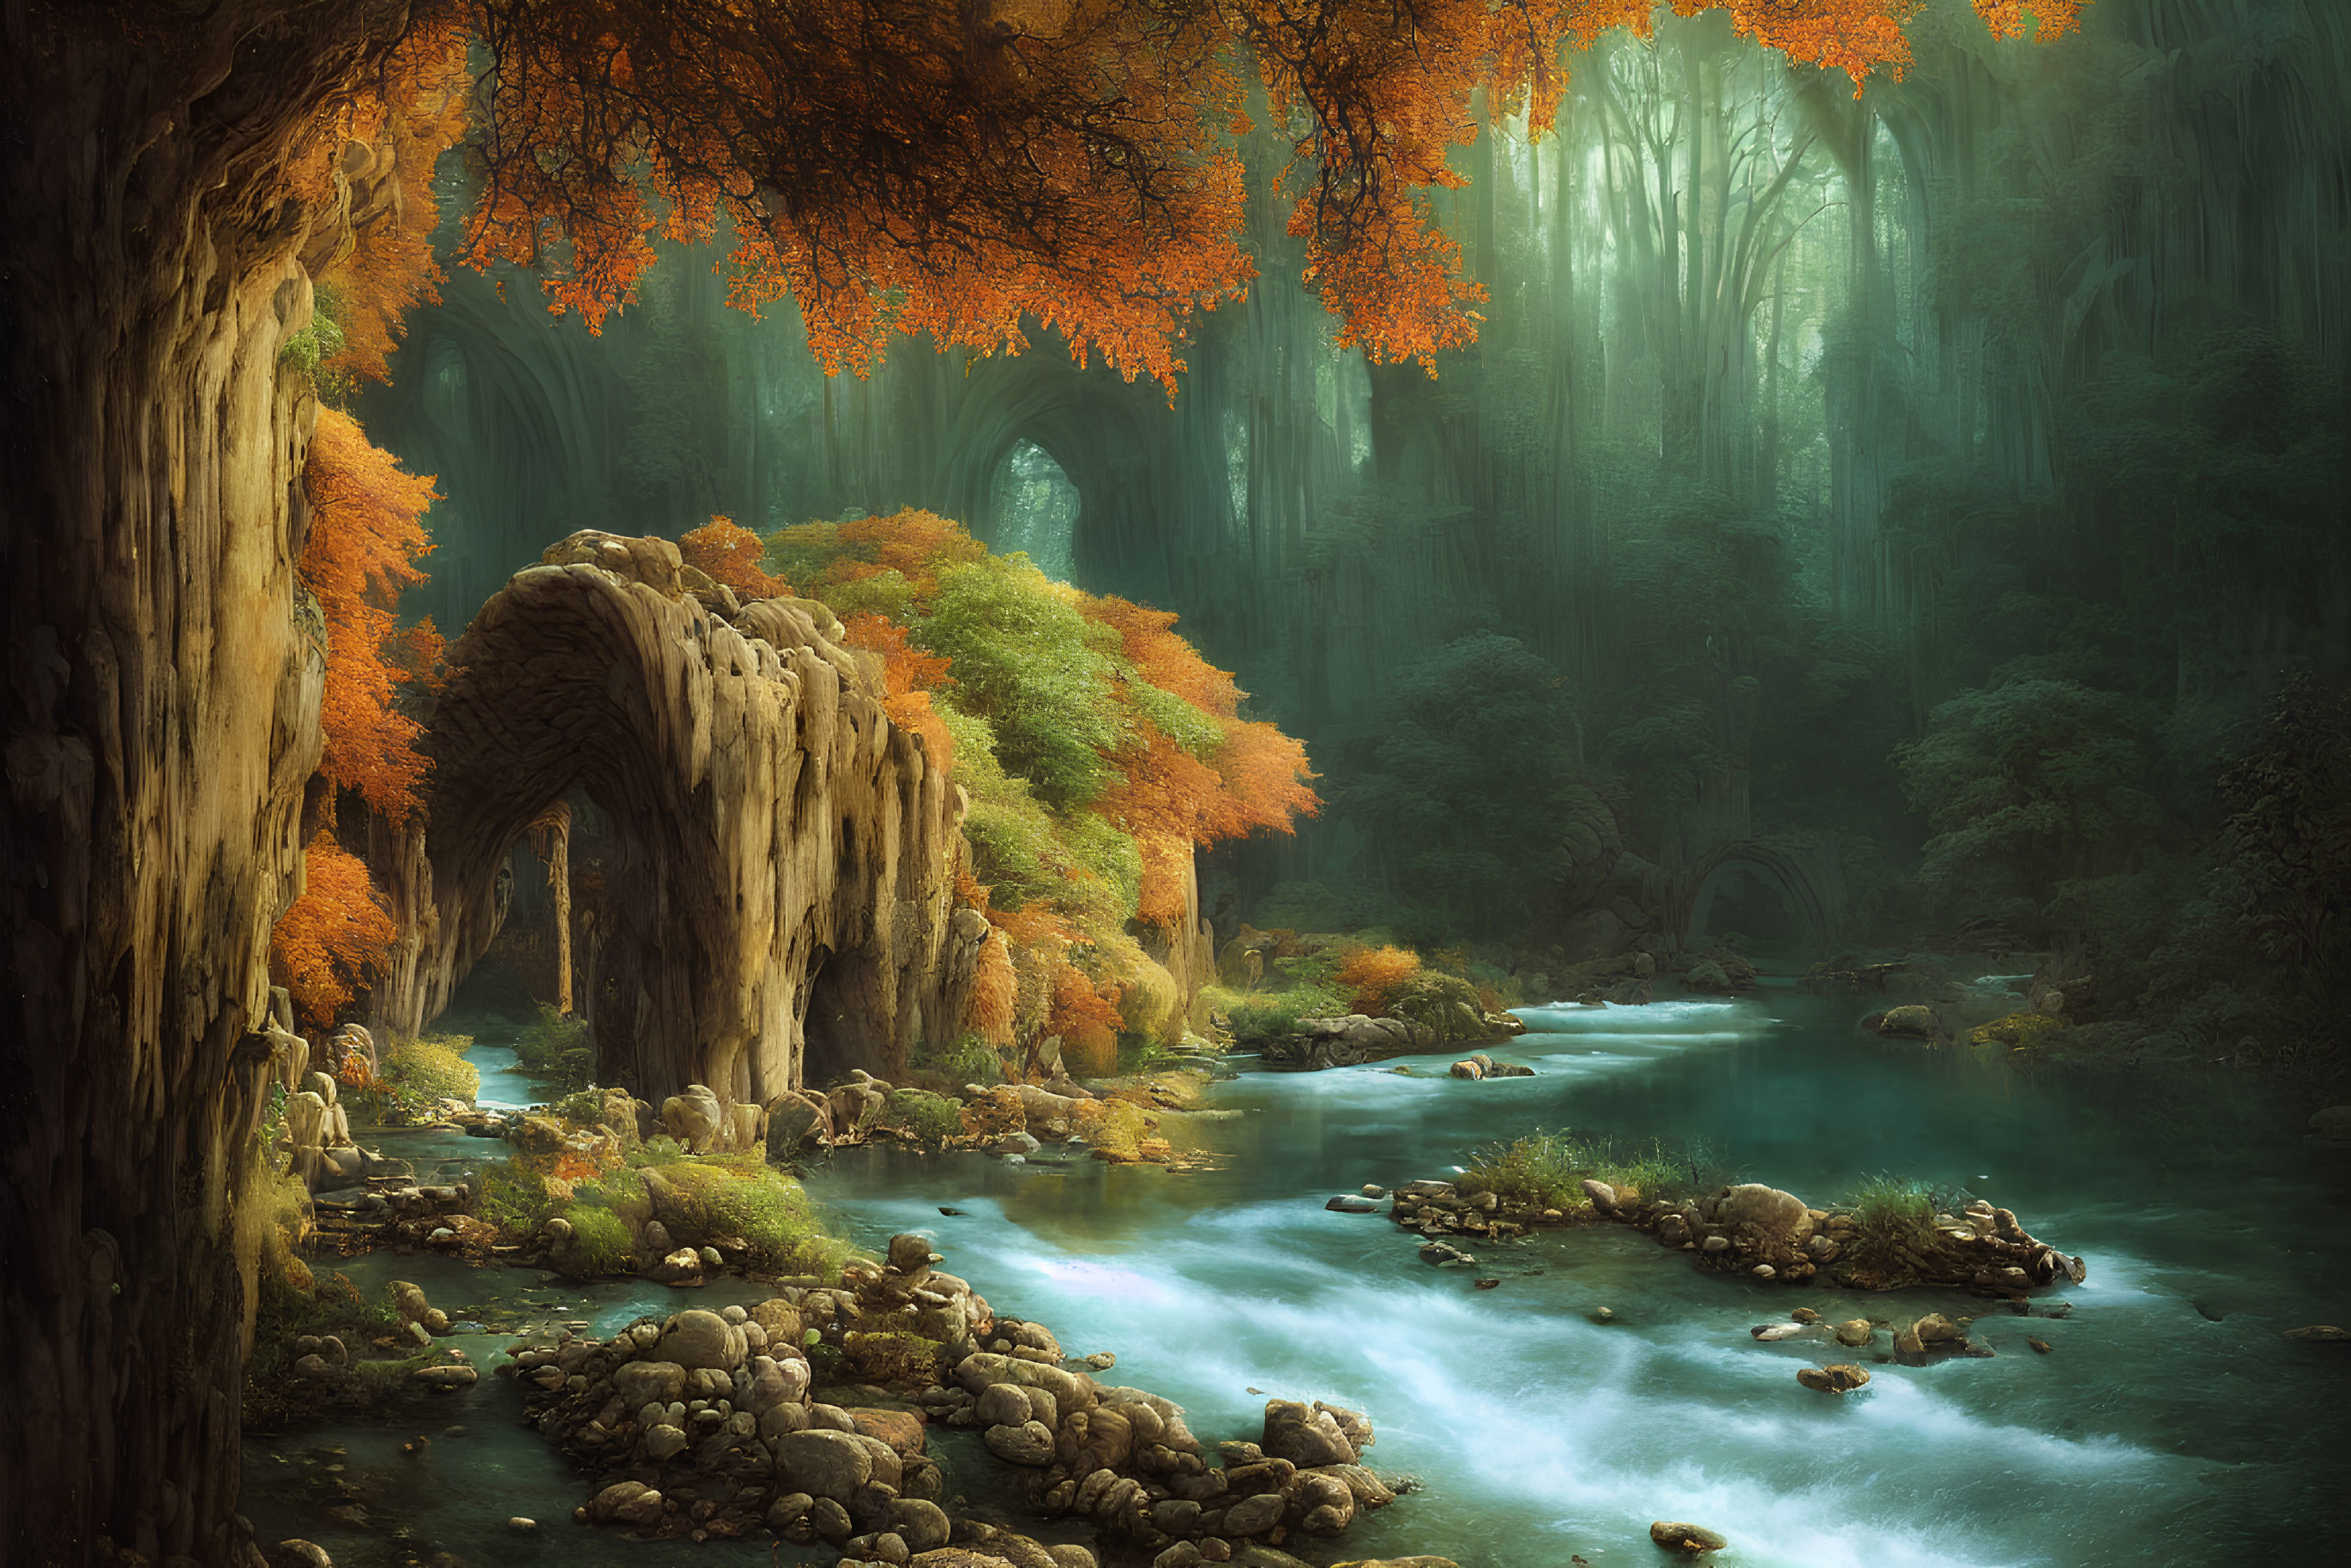 Tranquil forest scene with stone arch bridge over blue river